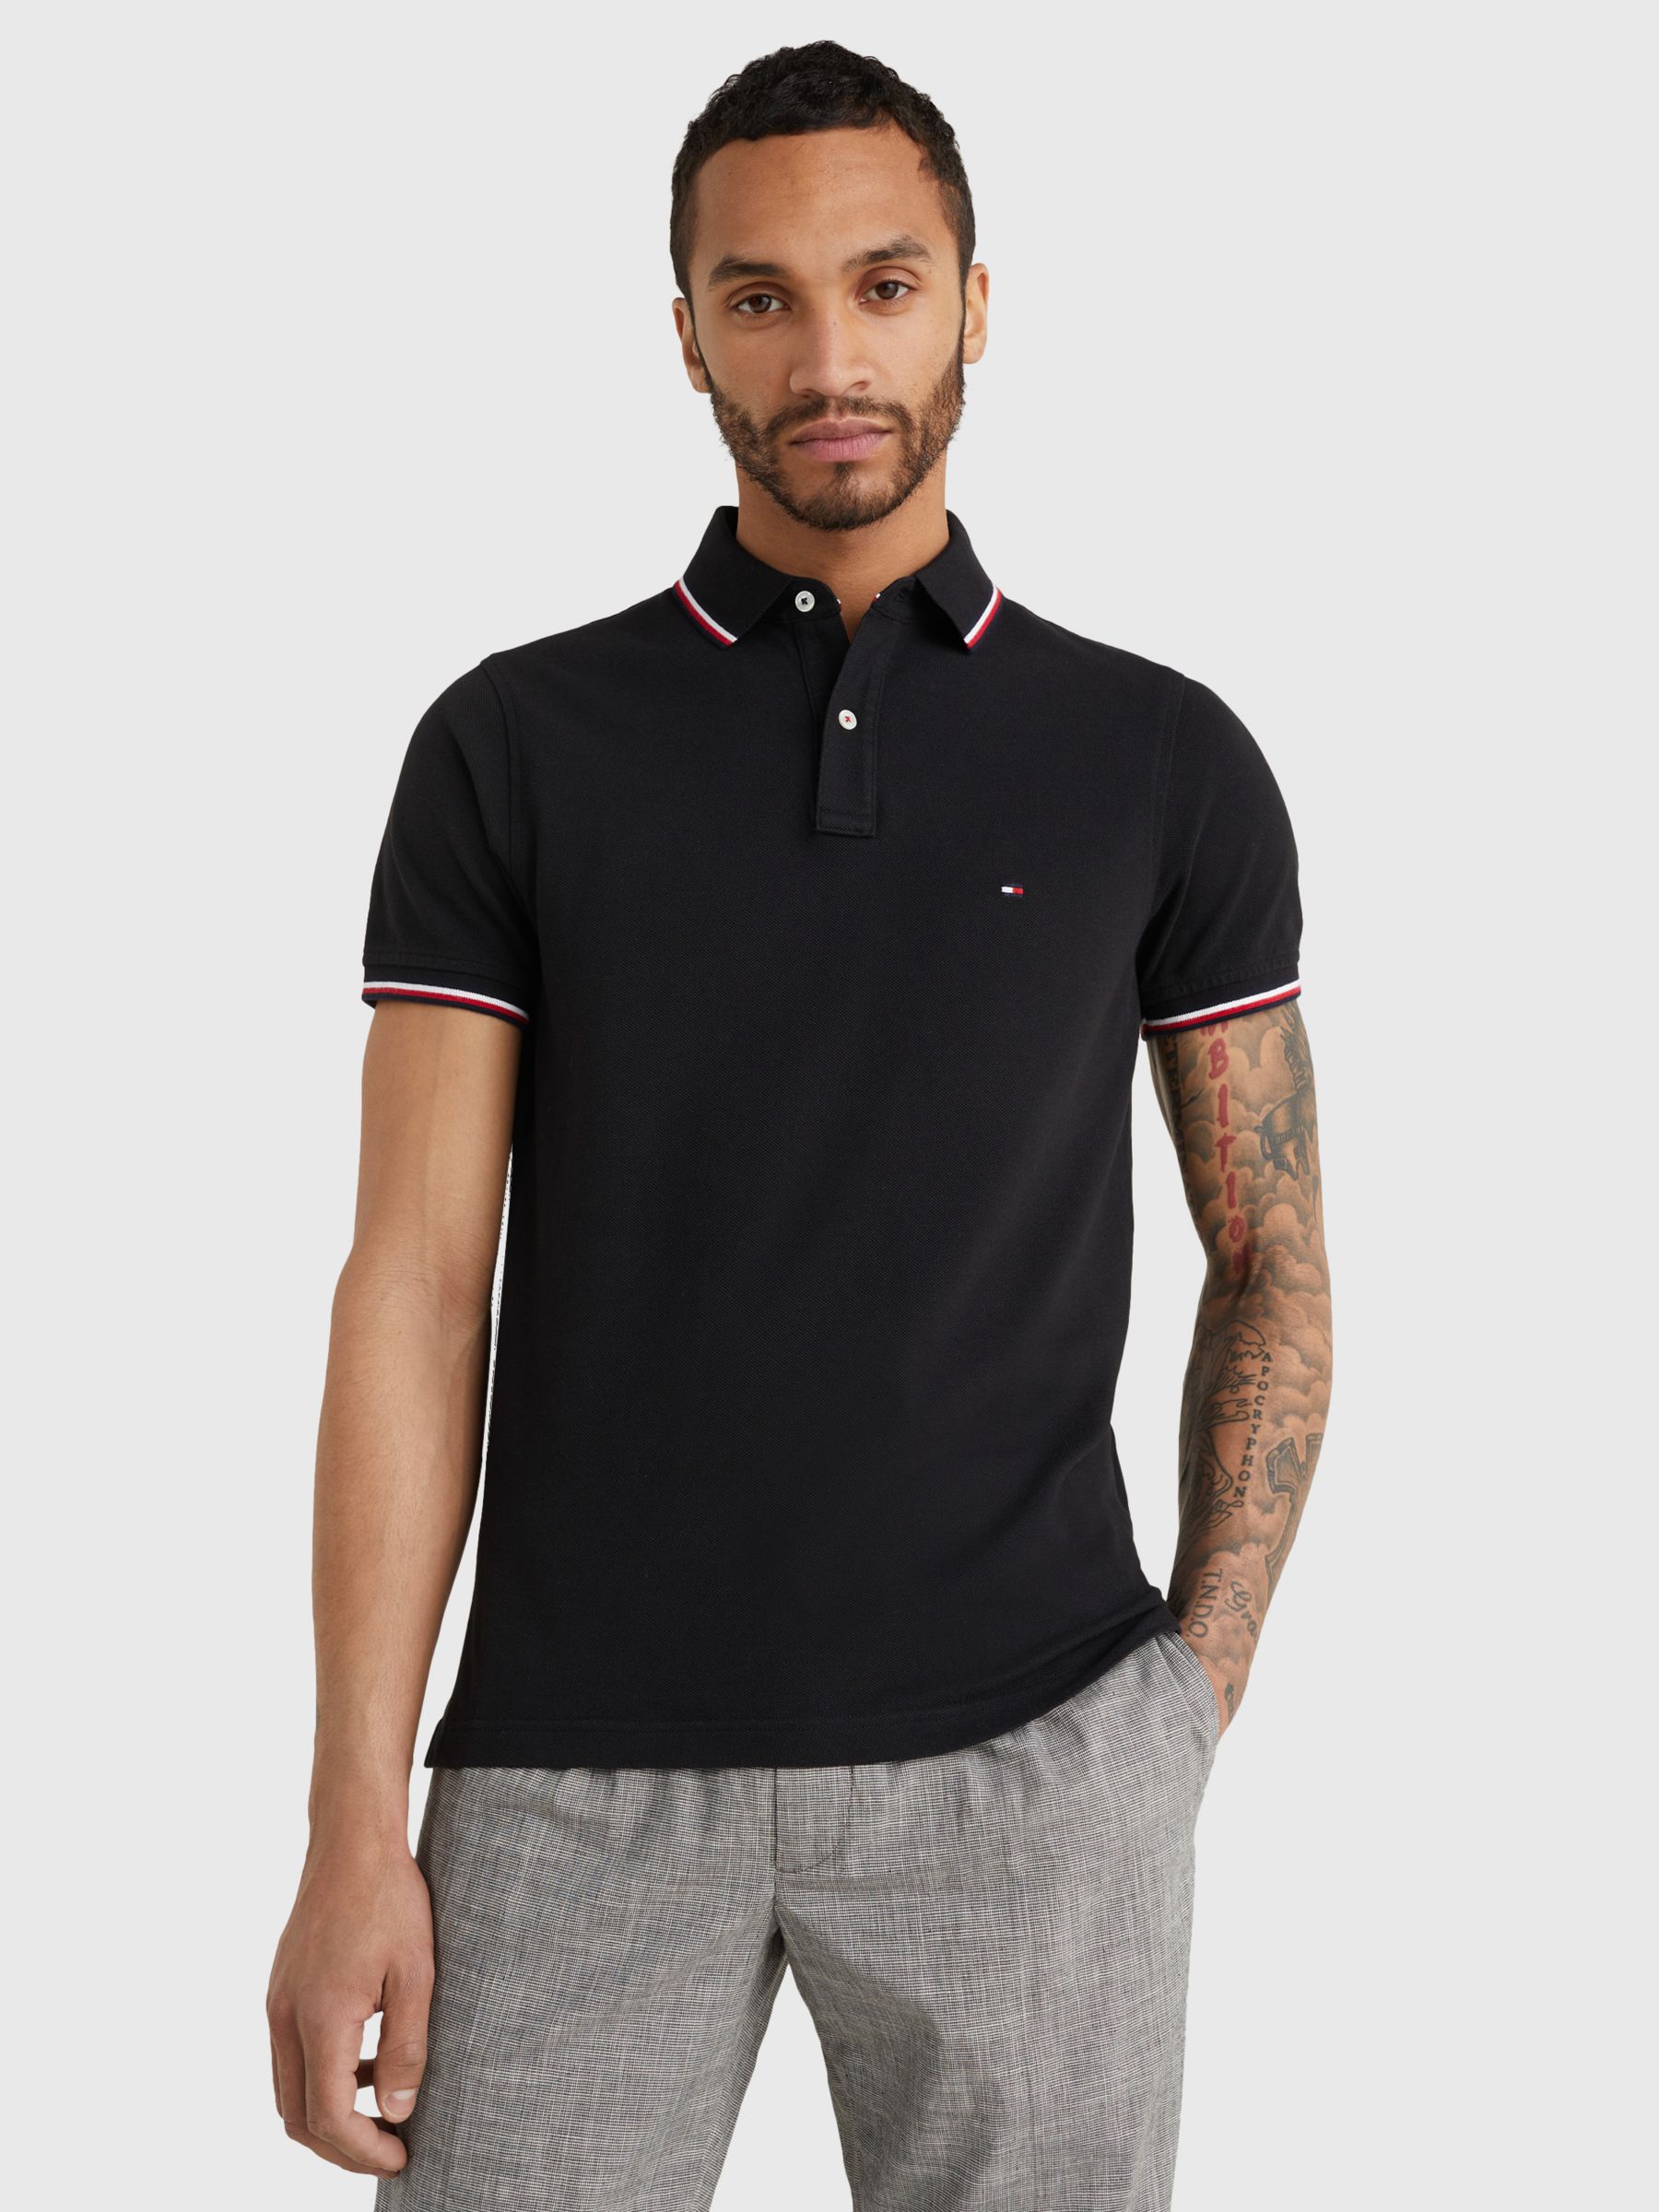 Tommy Hilfiger Tipped Organic Cotton Slim Fit Shirt, Black at Lewis &